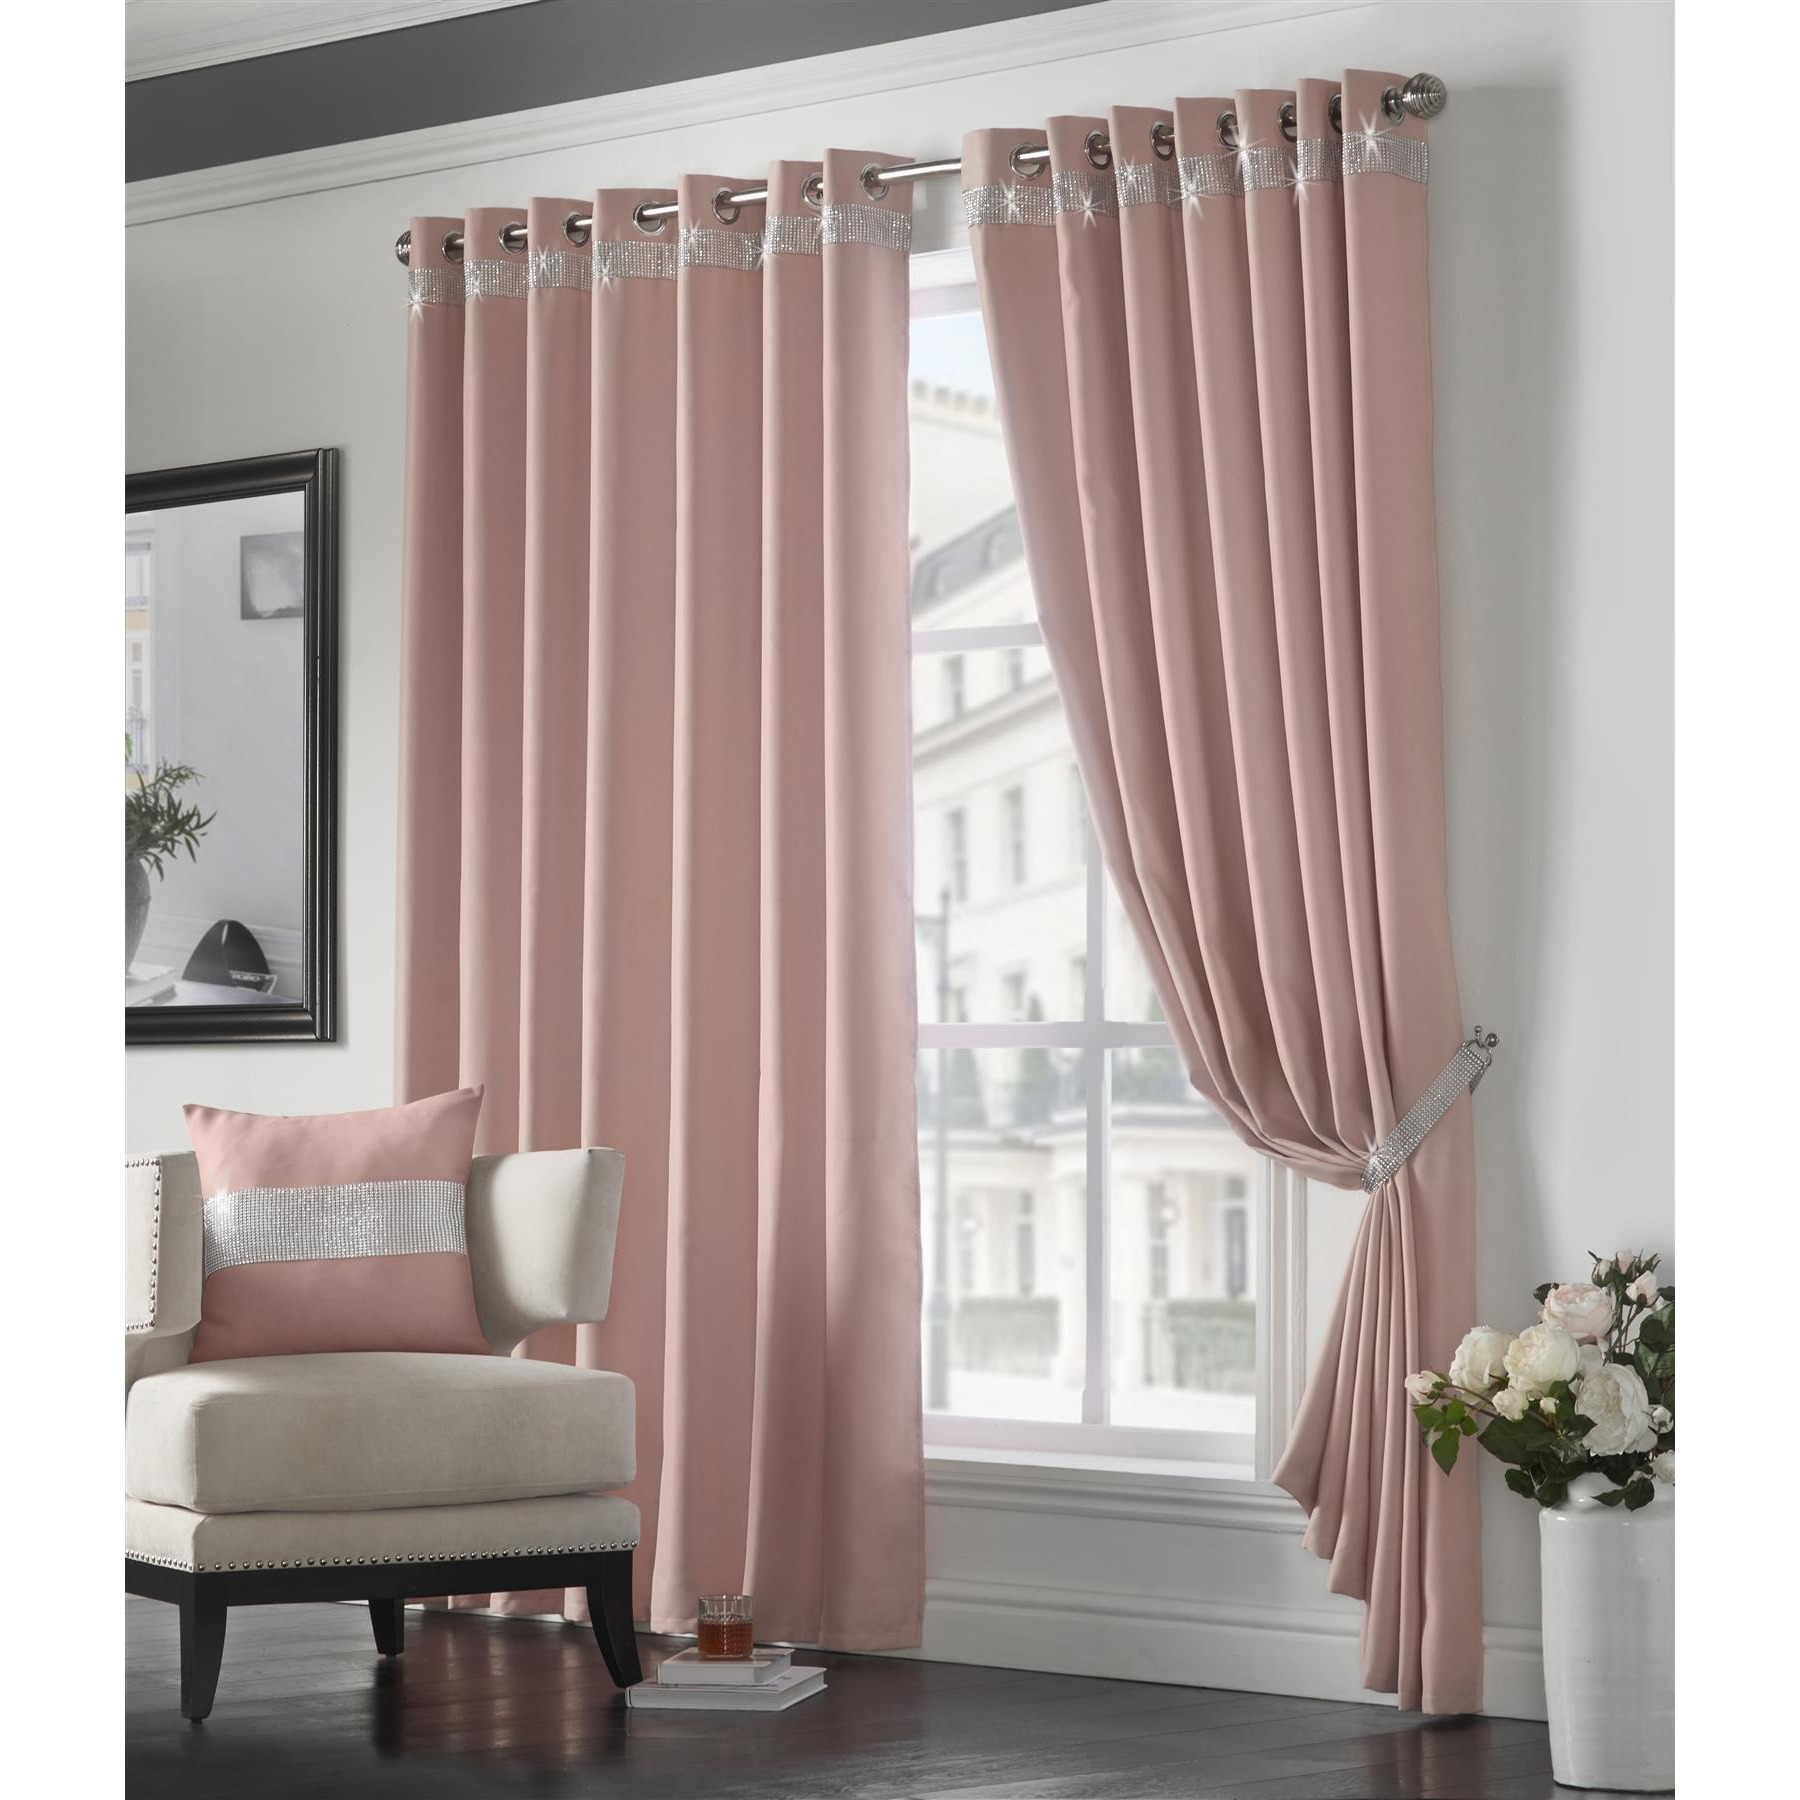 Palace Diamante Ring Top Blackout Curtains - image 1